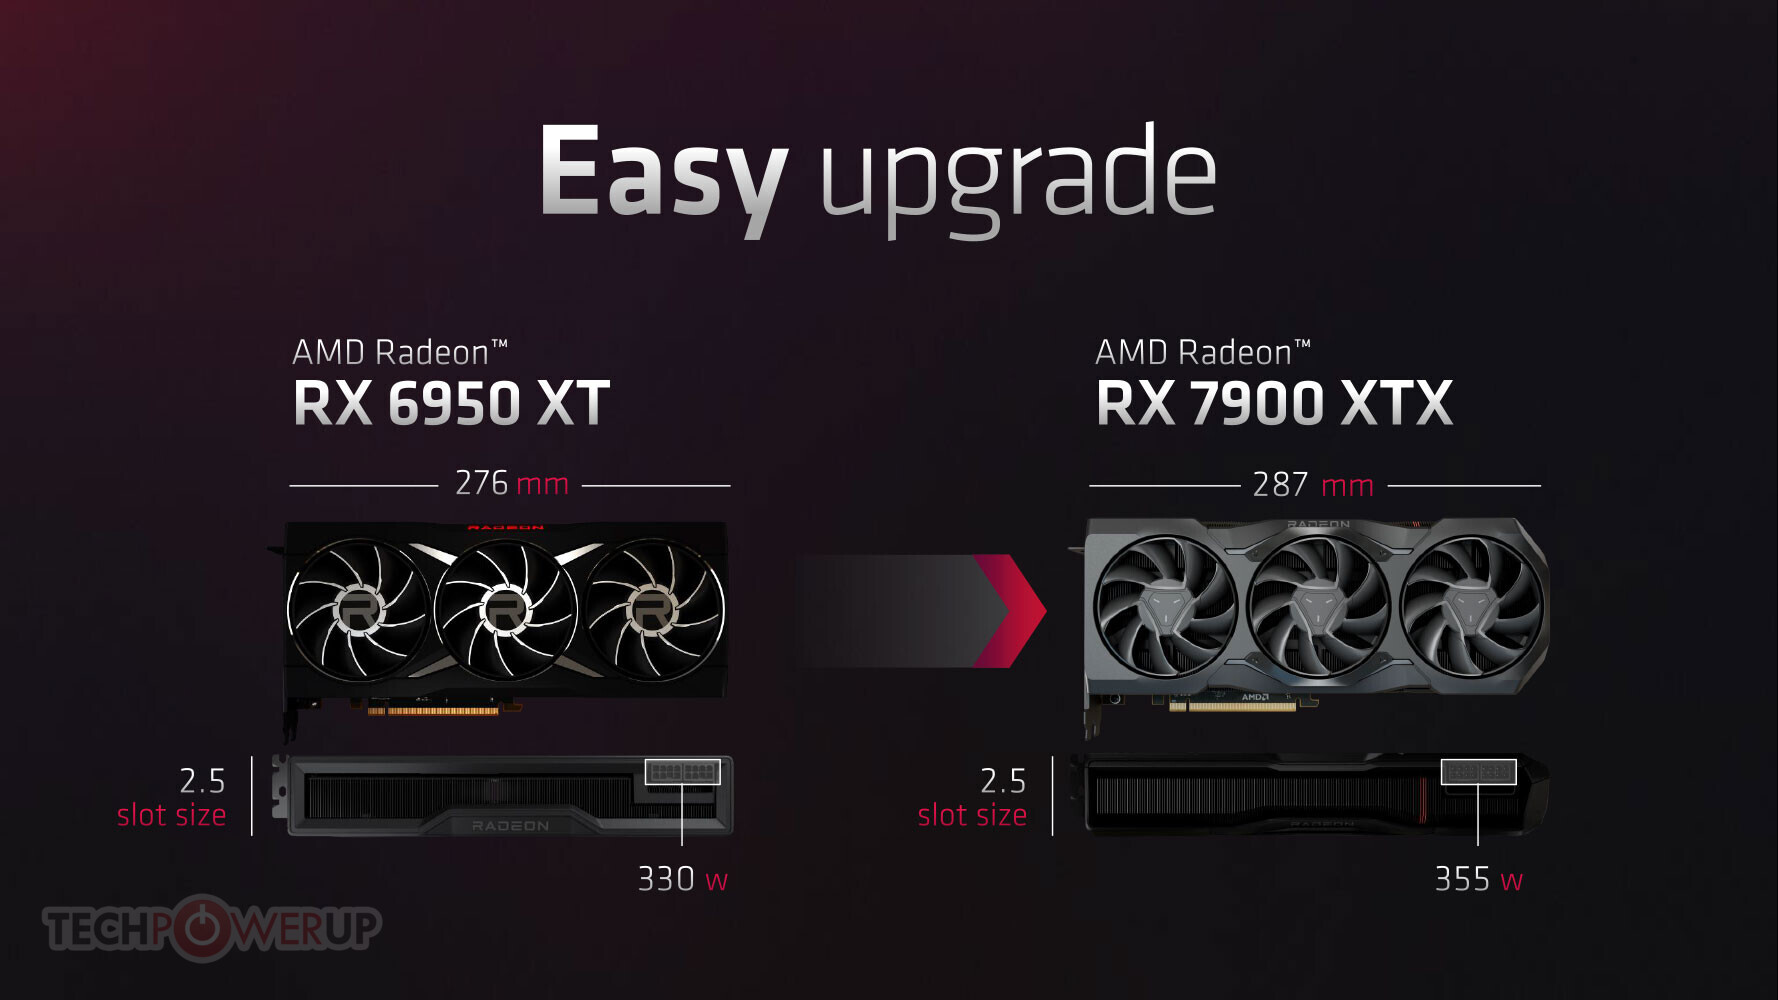 AMD Radeon RX 7900 XT Power Analysis & Overclocking Guide - Hardware Busters